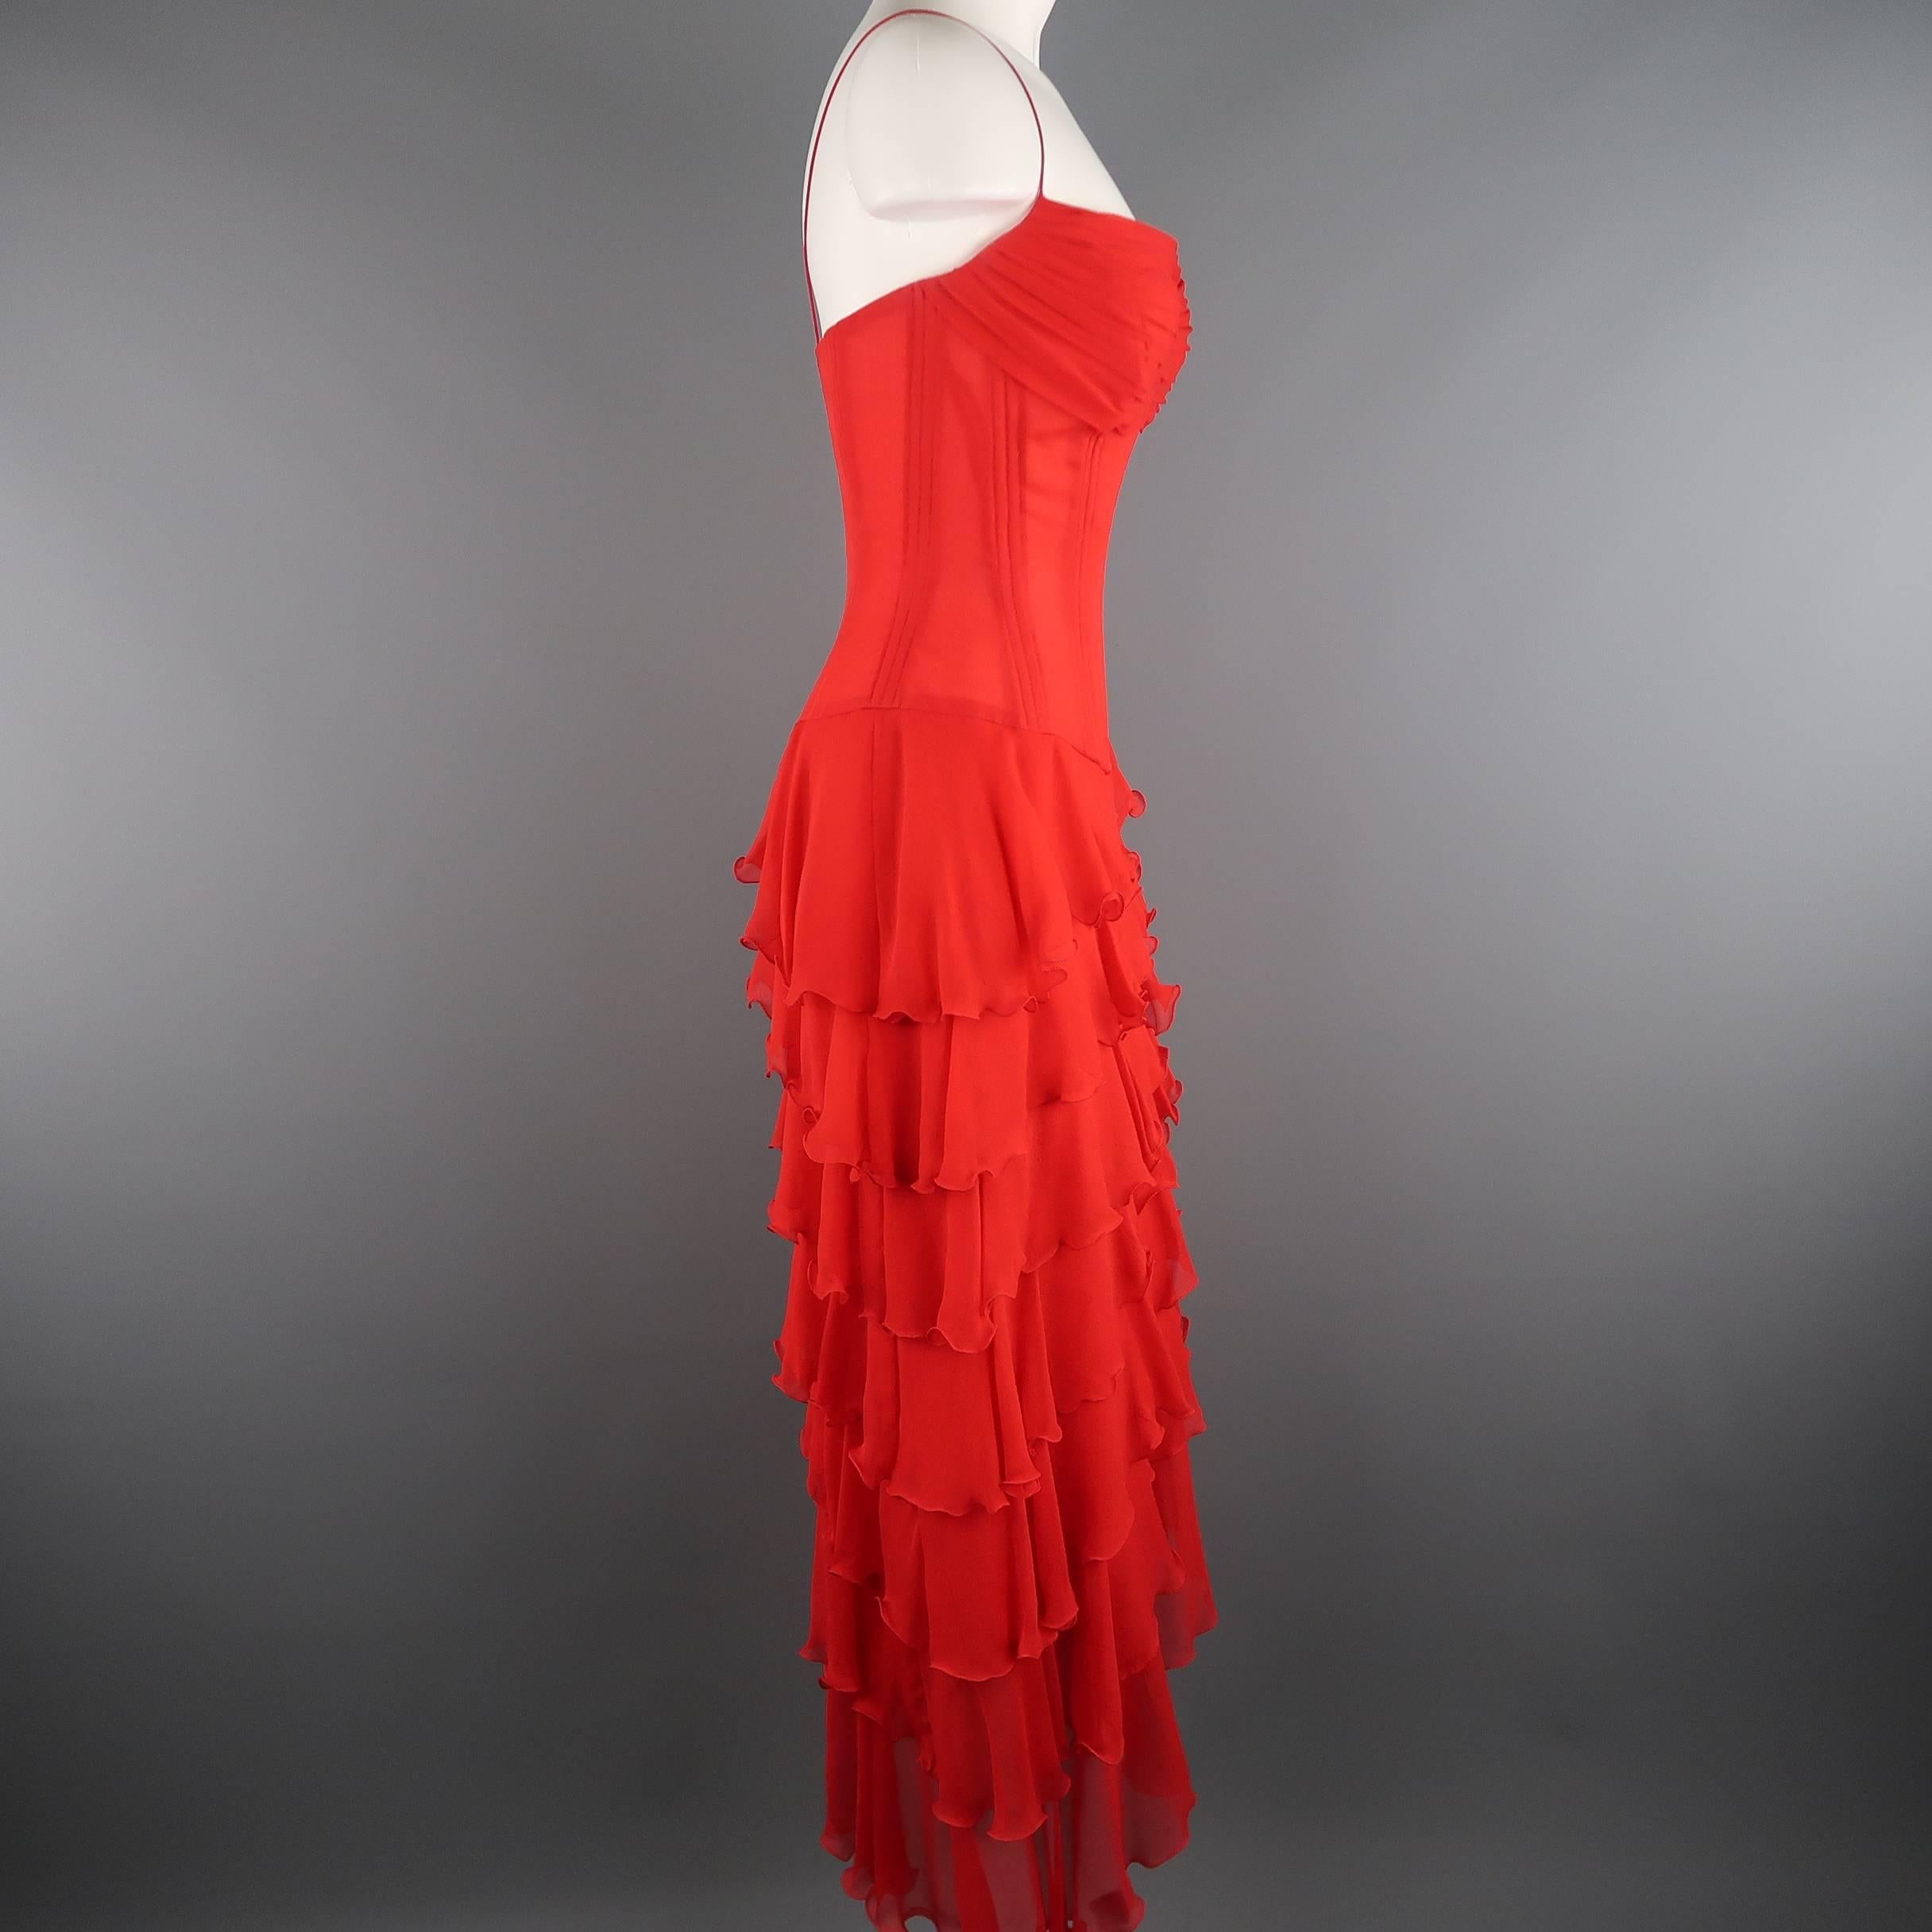 Vicky Tiel Couture Dress - Red Silk Chiffon Asymmetrical Ruffle Corset Cocktail 2